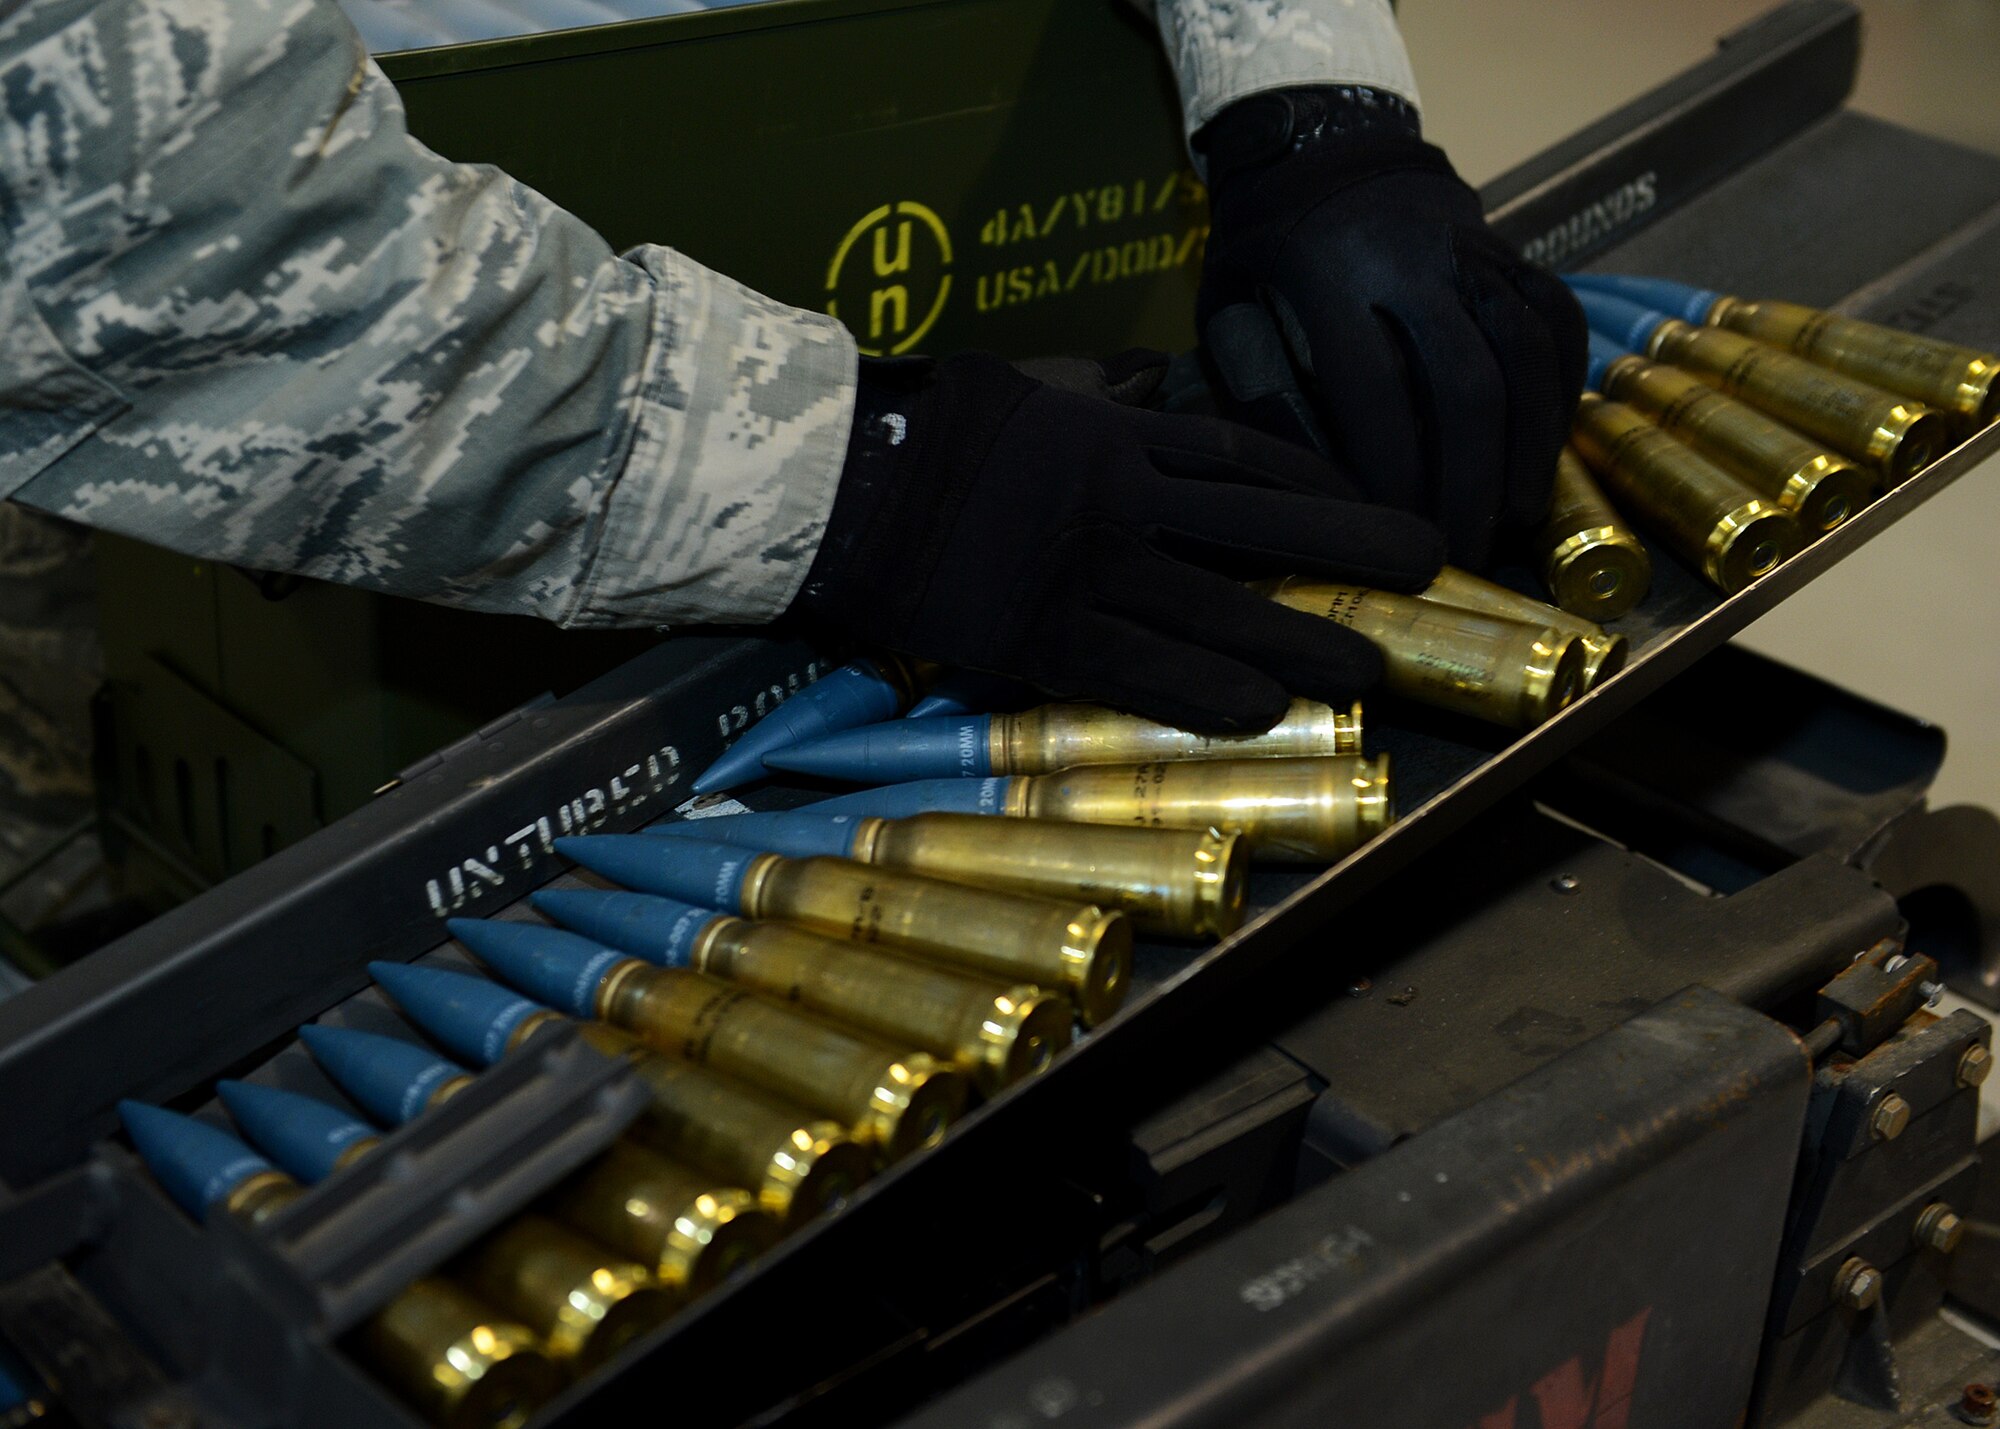 U.S. Air Force Staff Sgt. Jonathan Shelton, 52nd Equipment Maintenance Squadron munitions storage crew chief from Bassett, Va., places 20 mm target practice rounds on a replenisher table at Lask Air Base, Poland, June 12, 2014. An F-16 Fighting Falcon fighter aircraft carries approximately 512 rounds, which were used in multinational exercises BALTOPS 14 and EAGLE TALON to train NATO pilots for future close-air-support missions. Exercises such as these aim to increase interoperability and partnership capacity with NATO nations. (U.S. Air Force photo by Airman 1st Class Kyle Gese/Released)